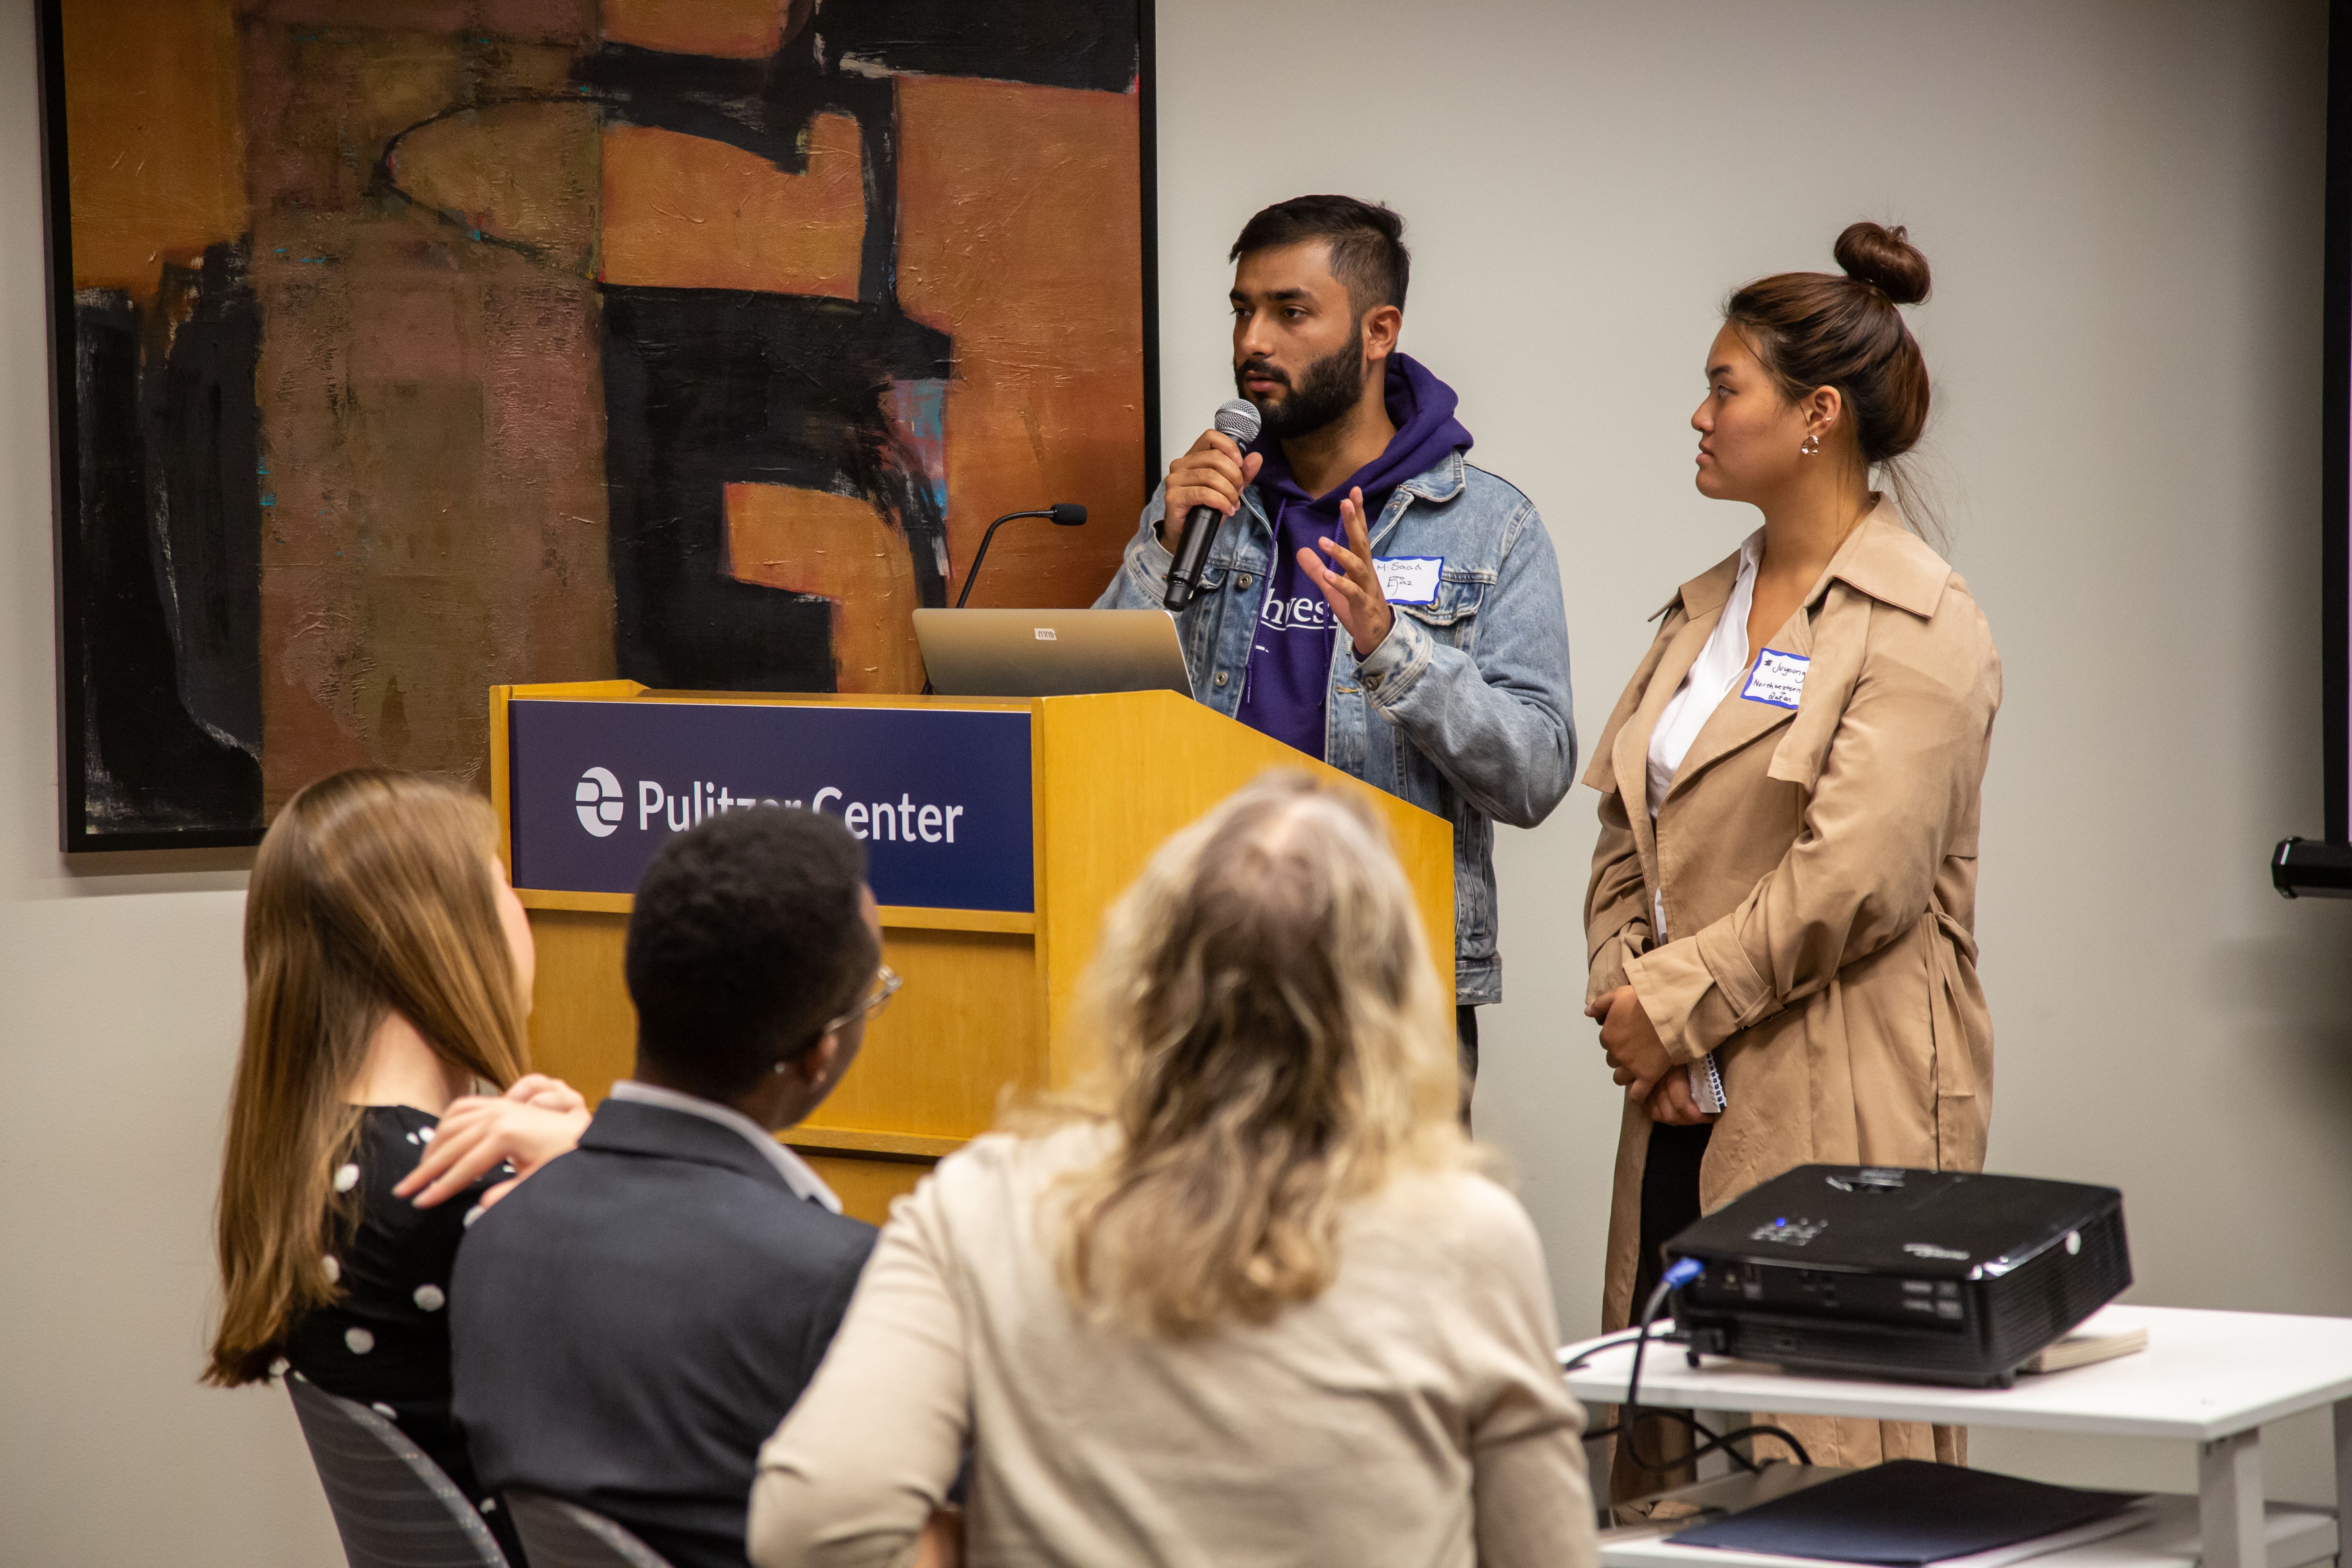 Saad Ejaz and Juyoung Choi (Northwestern University in Qatar) share stories of Yemeni refugees in South Korea on Day One of Washington Weekend. Image by Claire Seaton. United States, 2019.